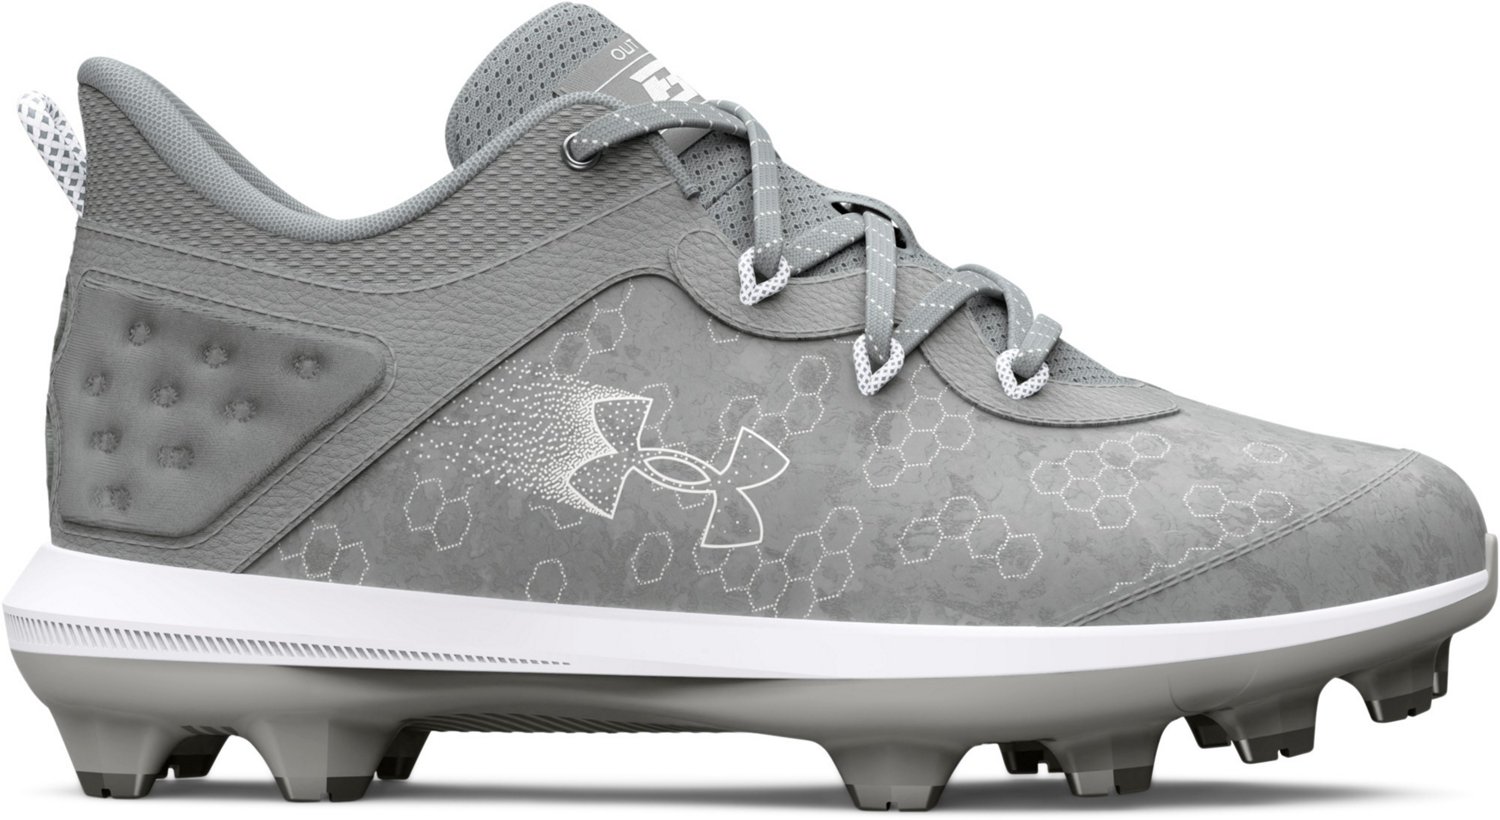 Under Armour Youth Harper 8 TPU Baseball Cleats